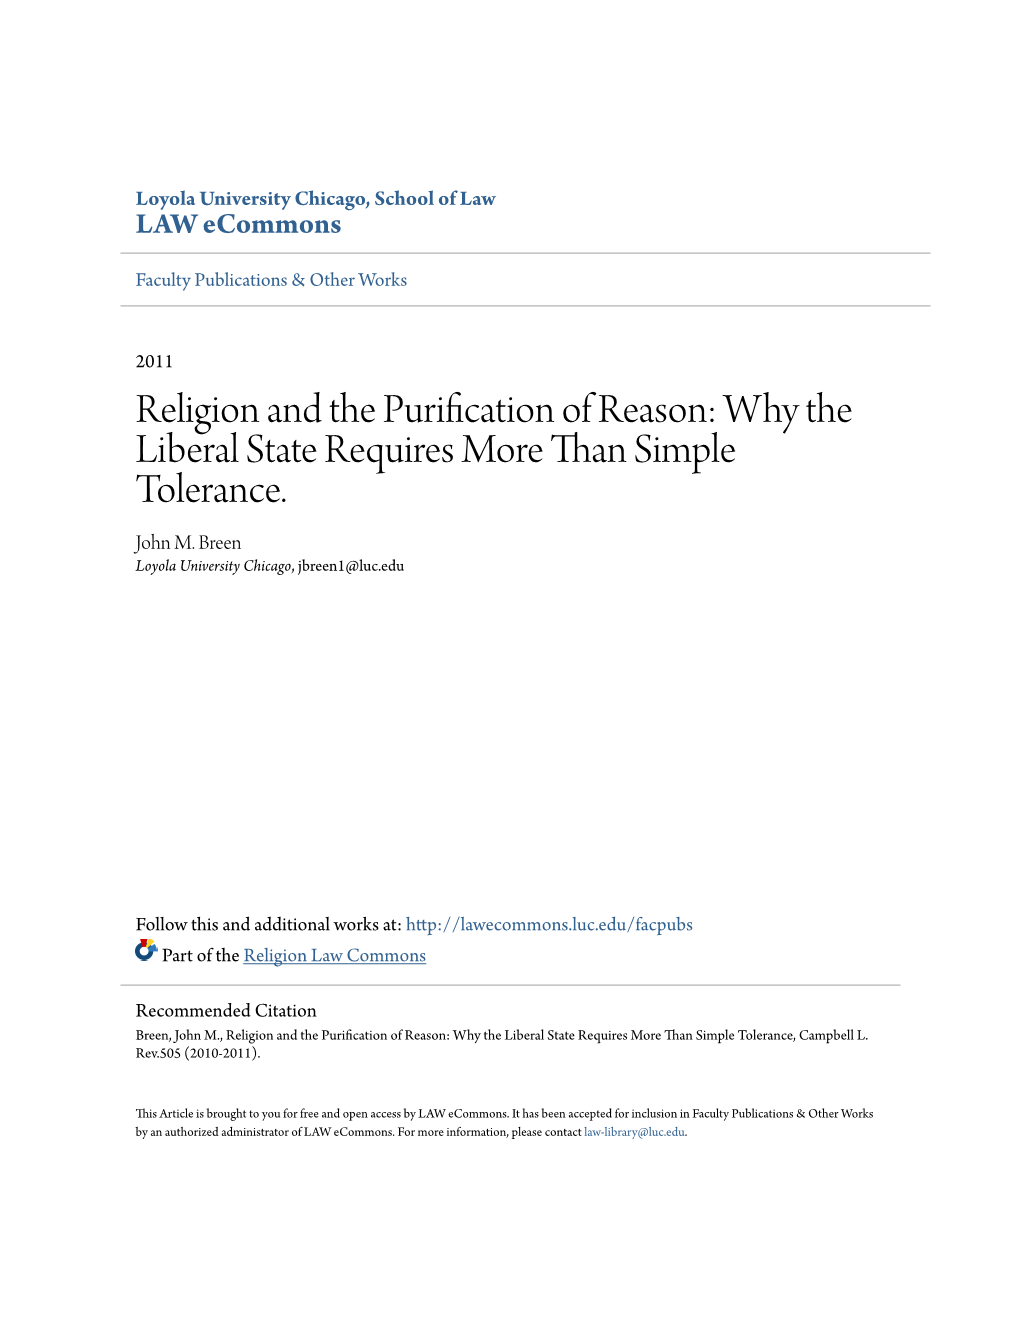 Religion and the Purification of Reason: Why the Liberal State Requires More Than Simple Tolerance